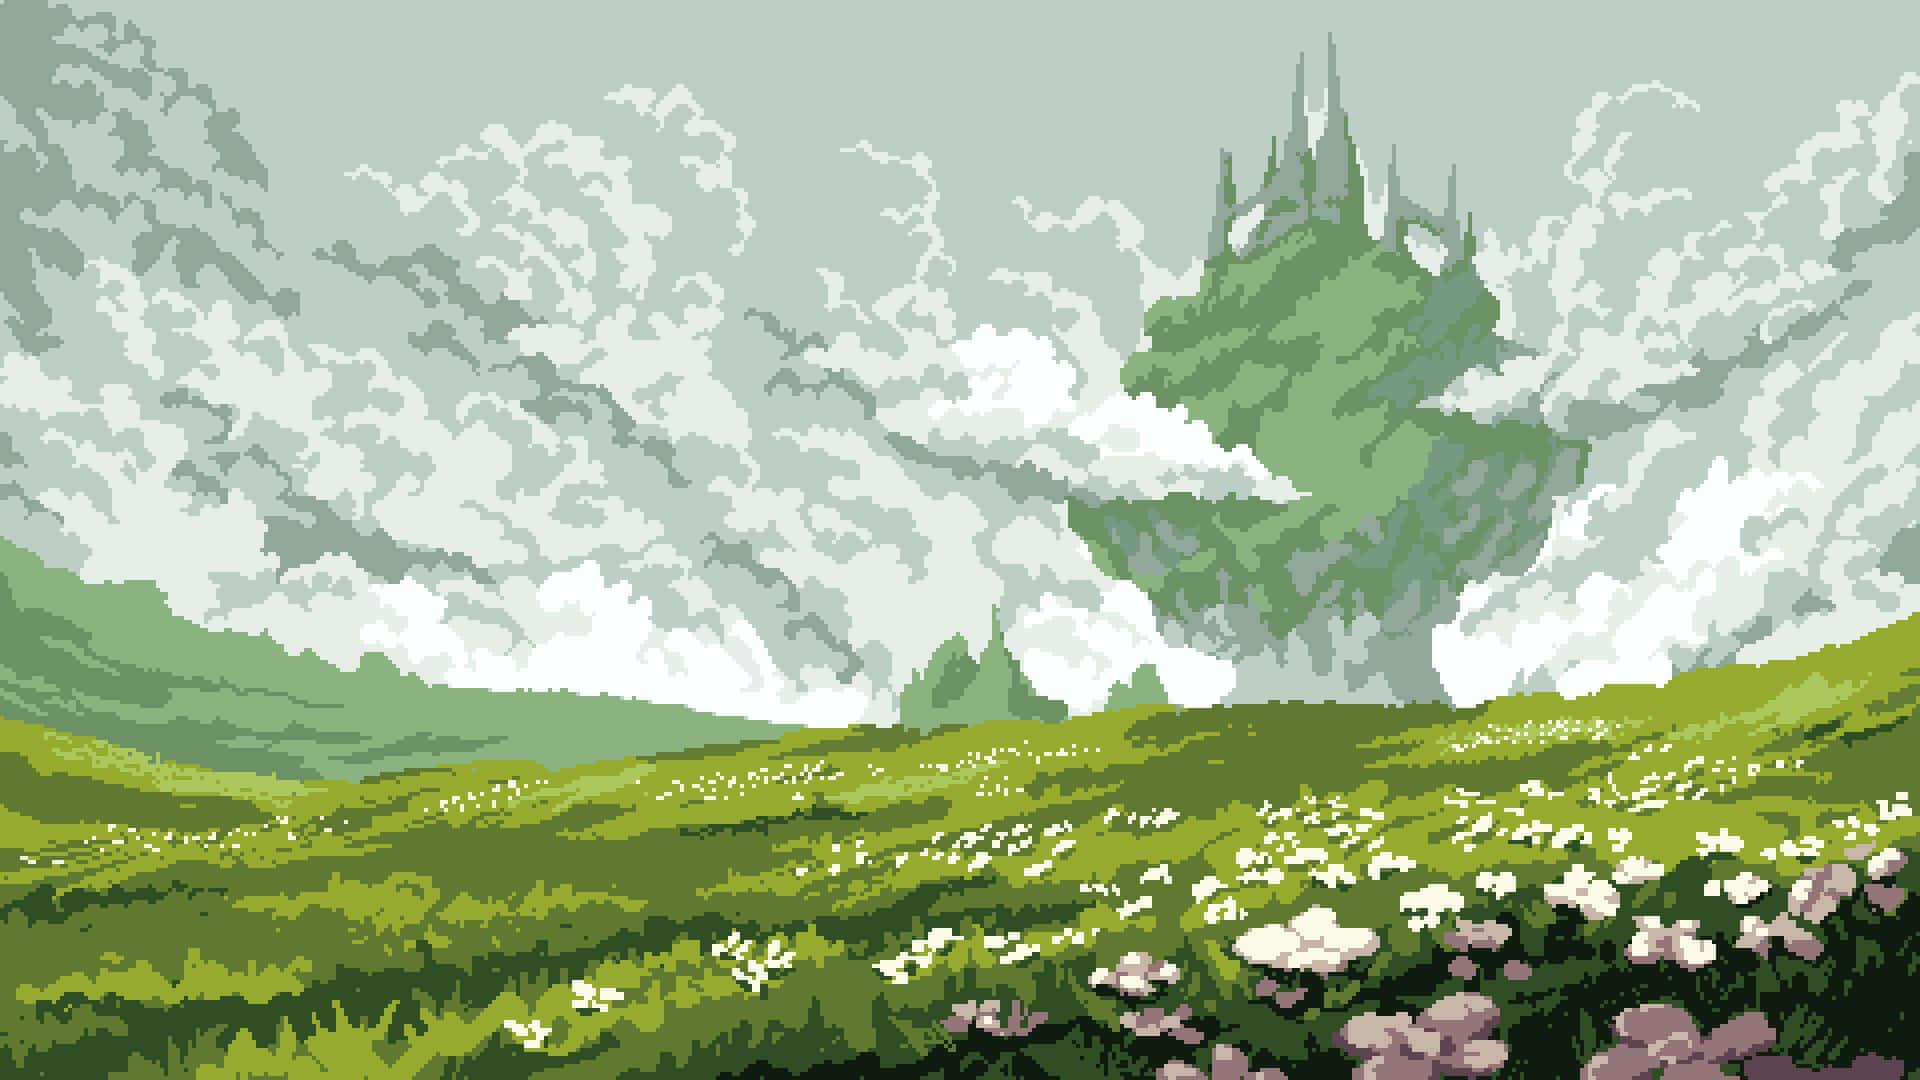 Pixelated Meadow With Clouds.jpg Wallpaper